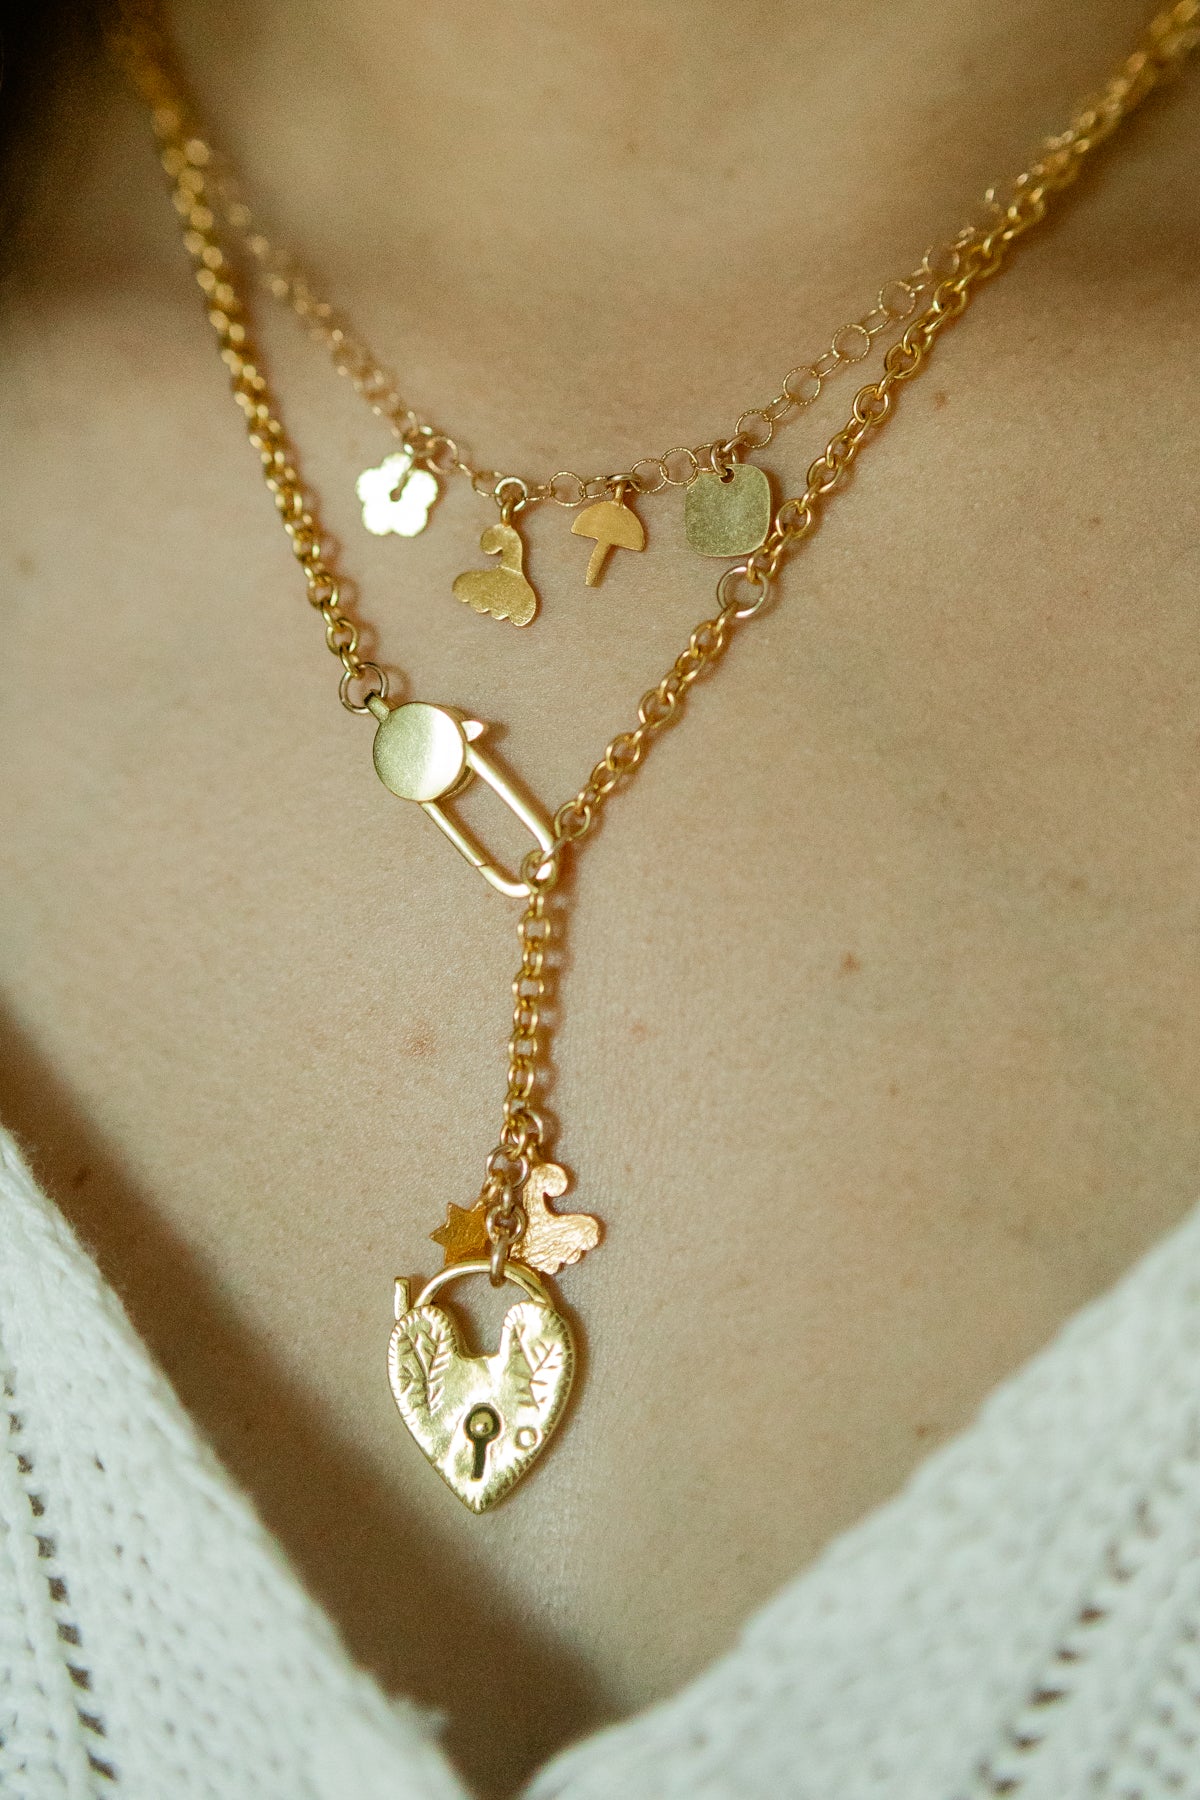 A meadow of charms on a fine gold chain from Italy